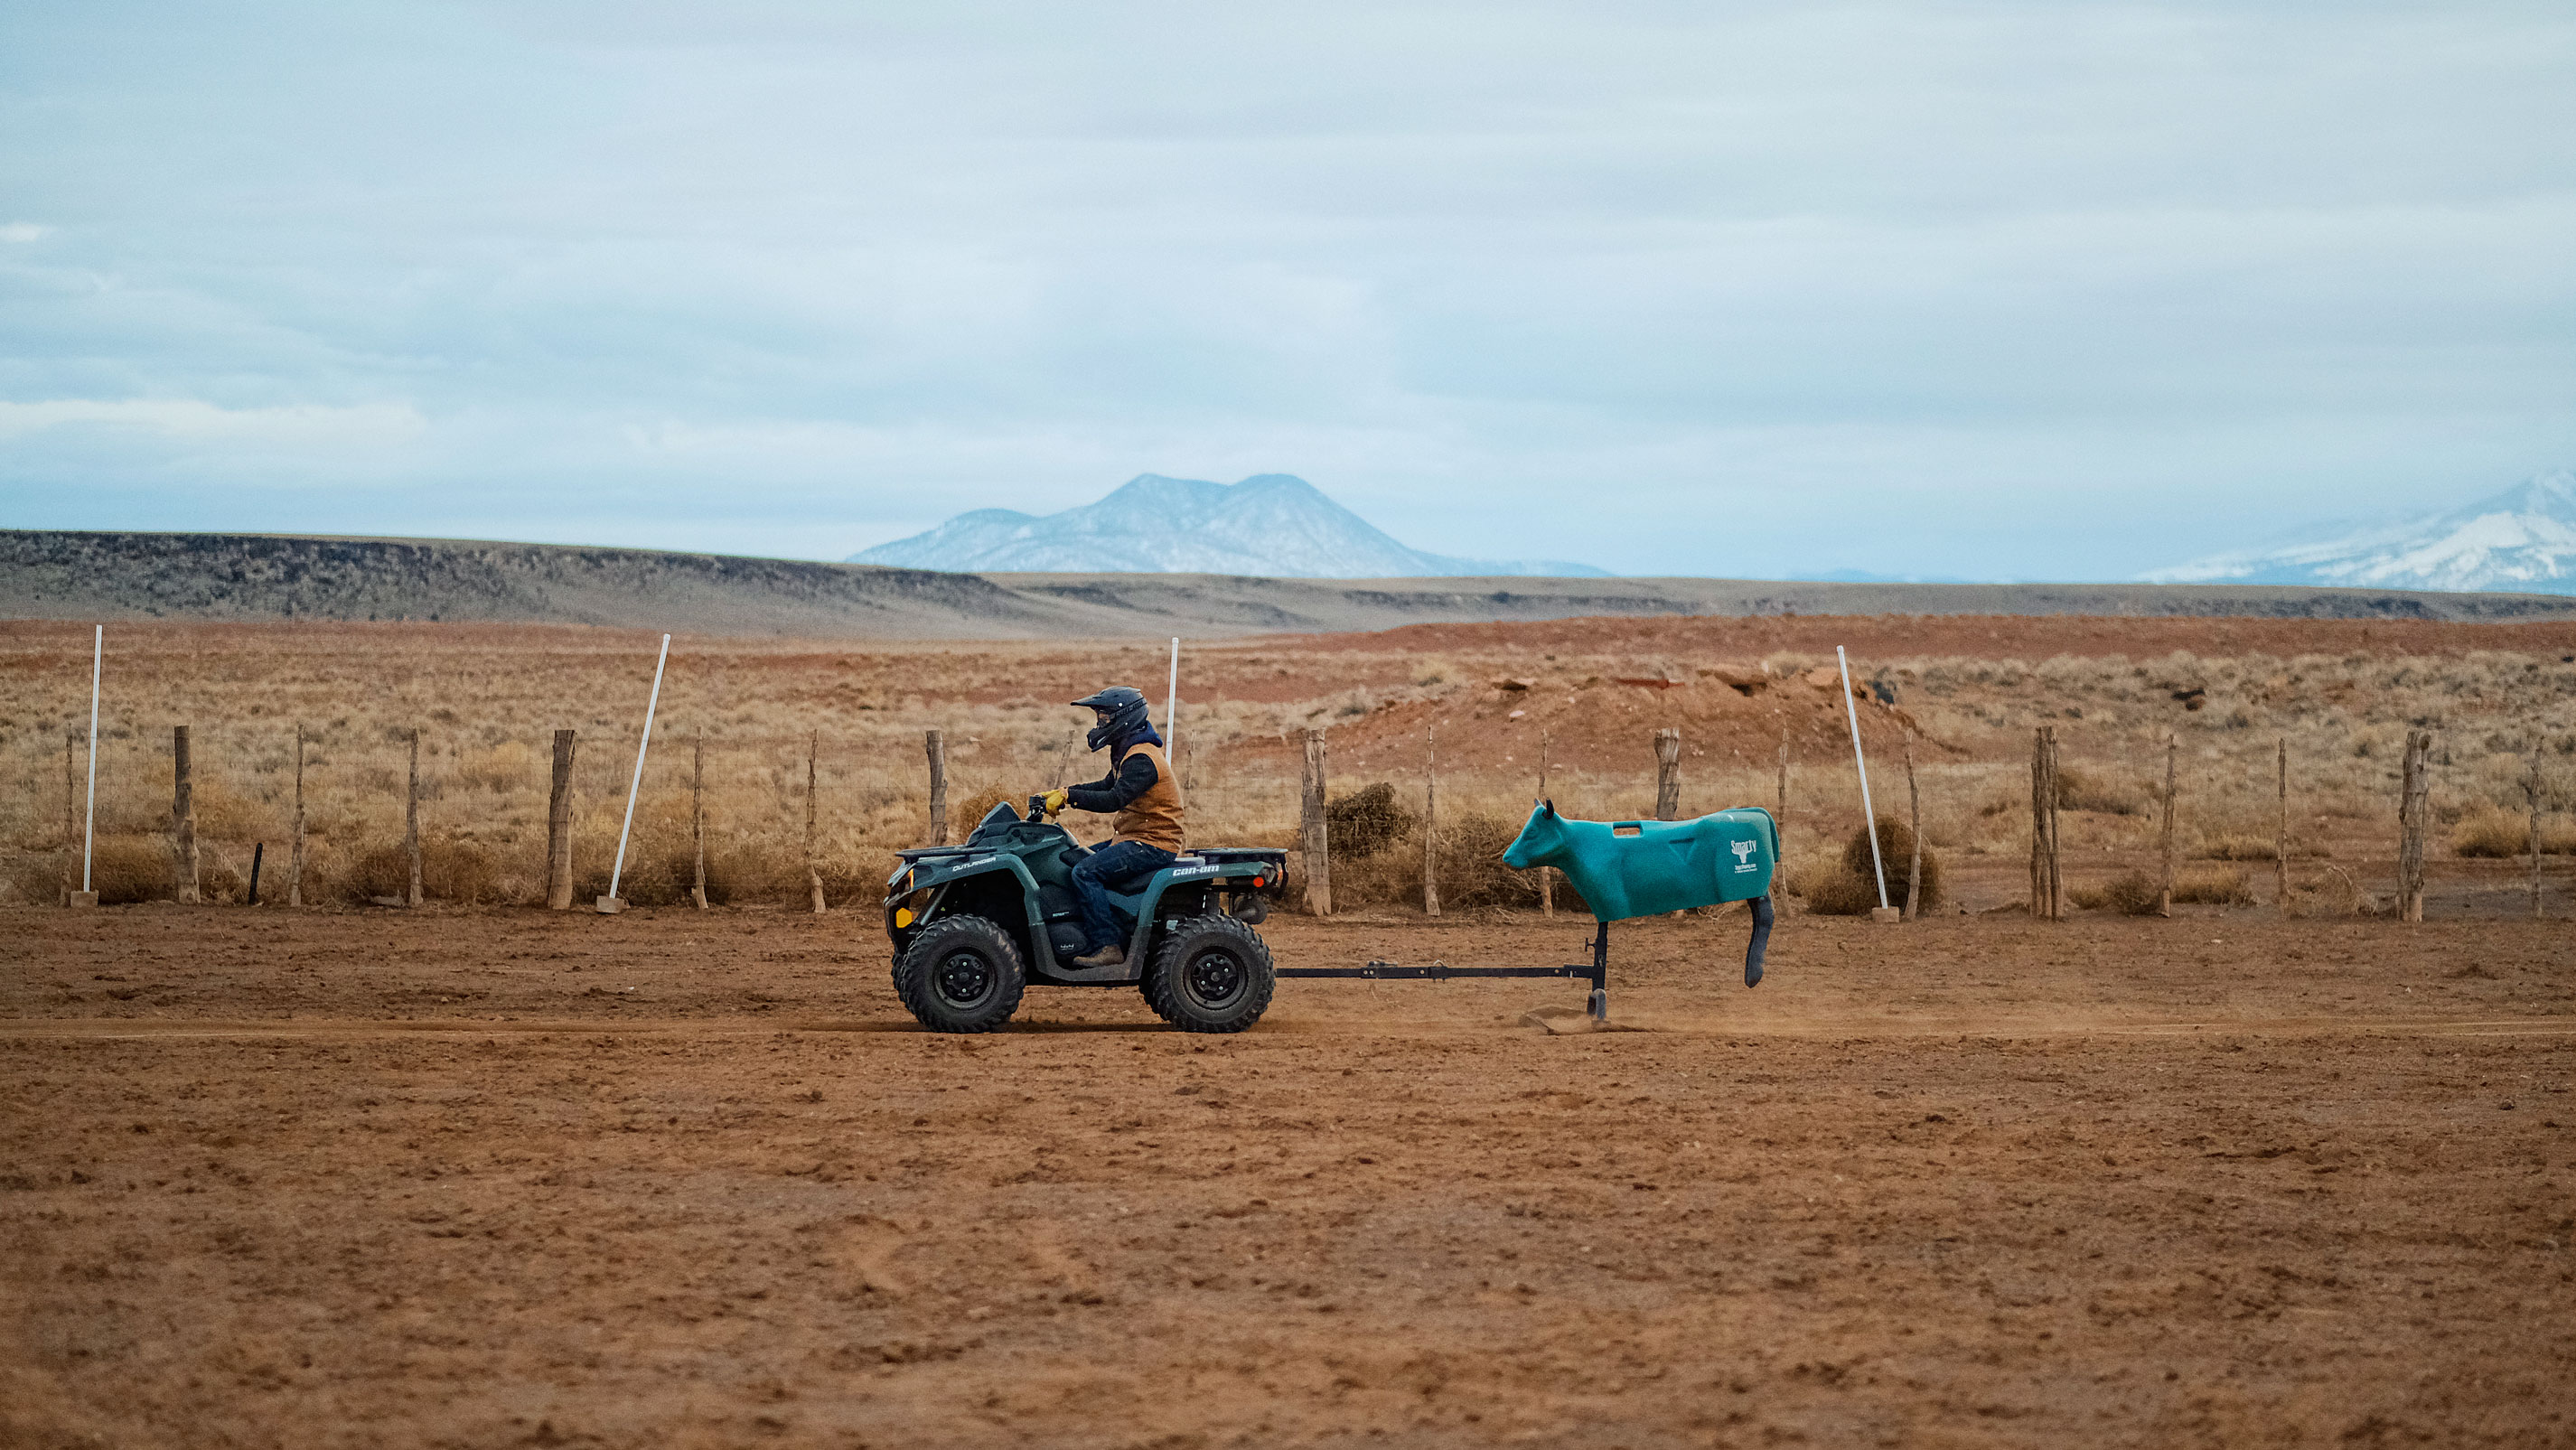 A rider using a Can-Am ATV on a ranch